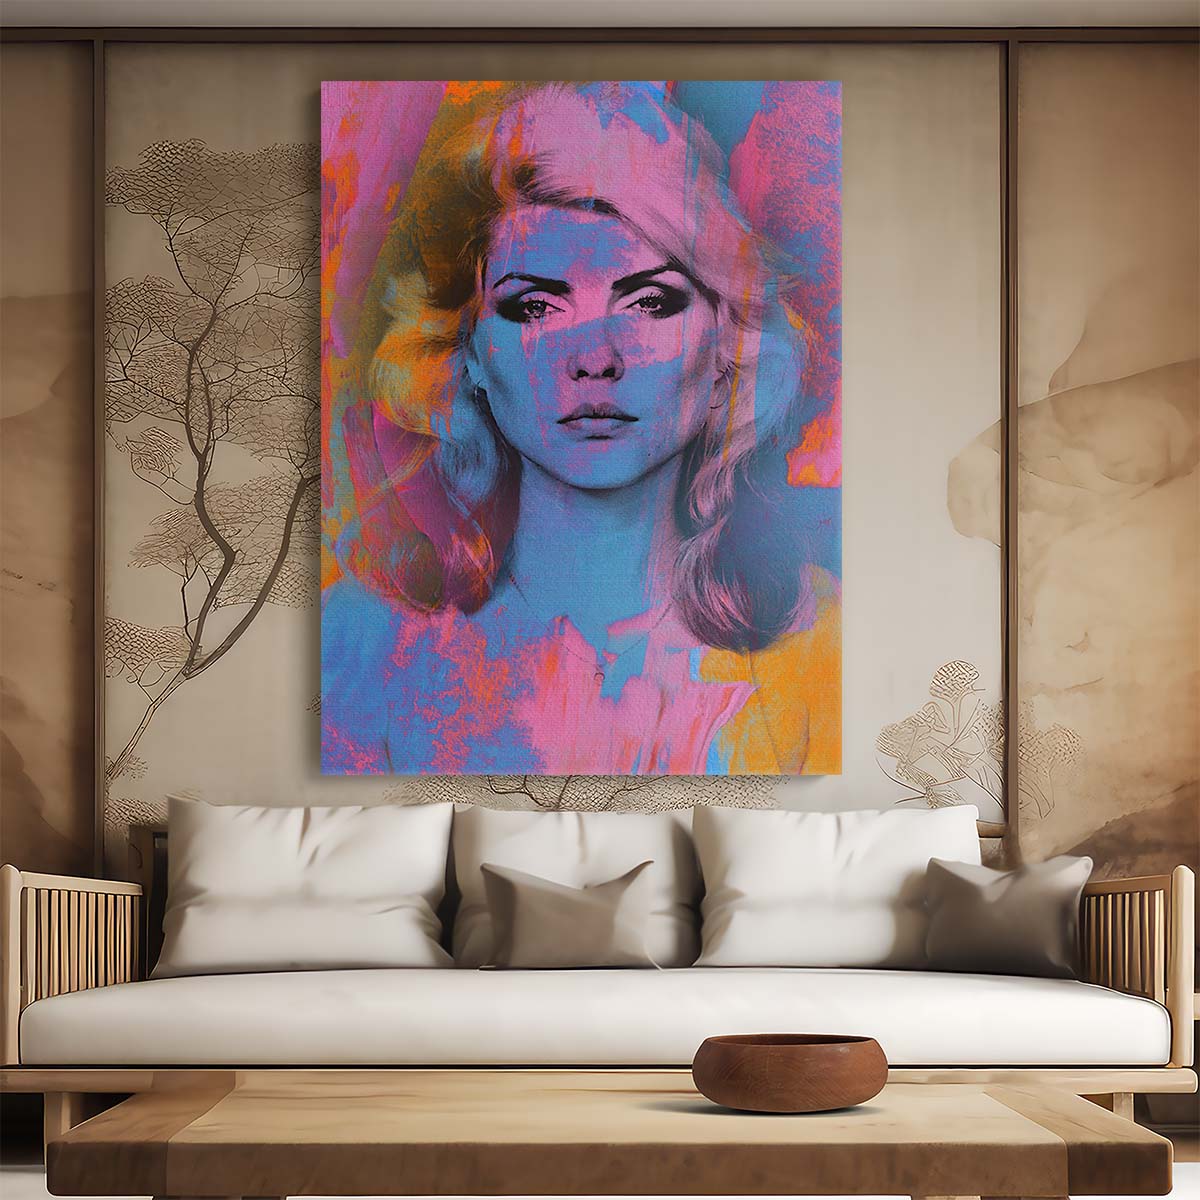 Debbie Harry Bright Colors Wall Art by Luxuriance Designs. Made in USA.